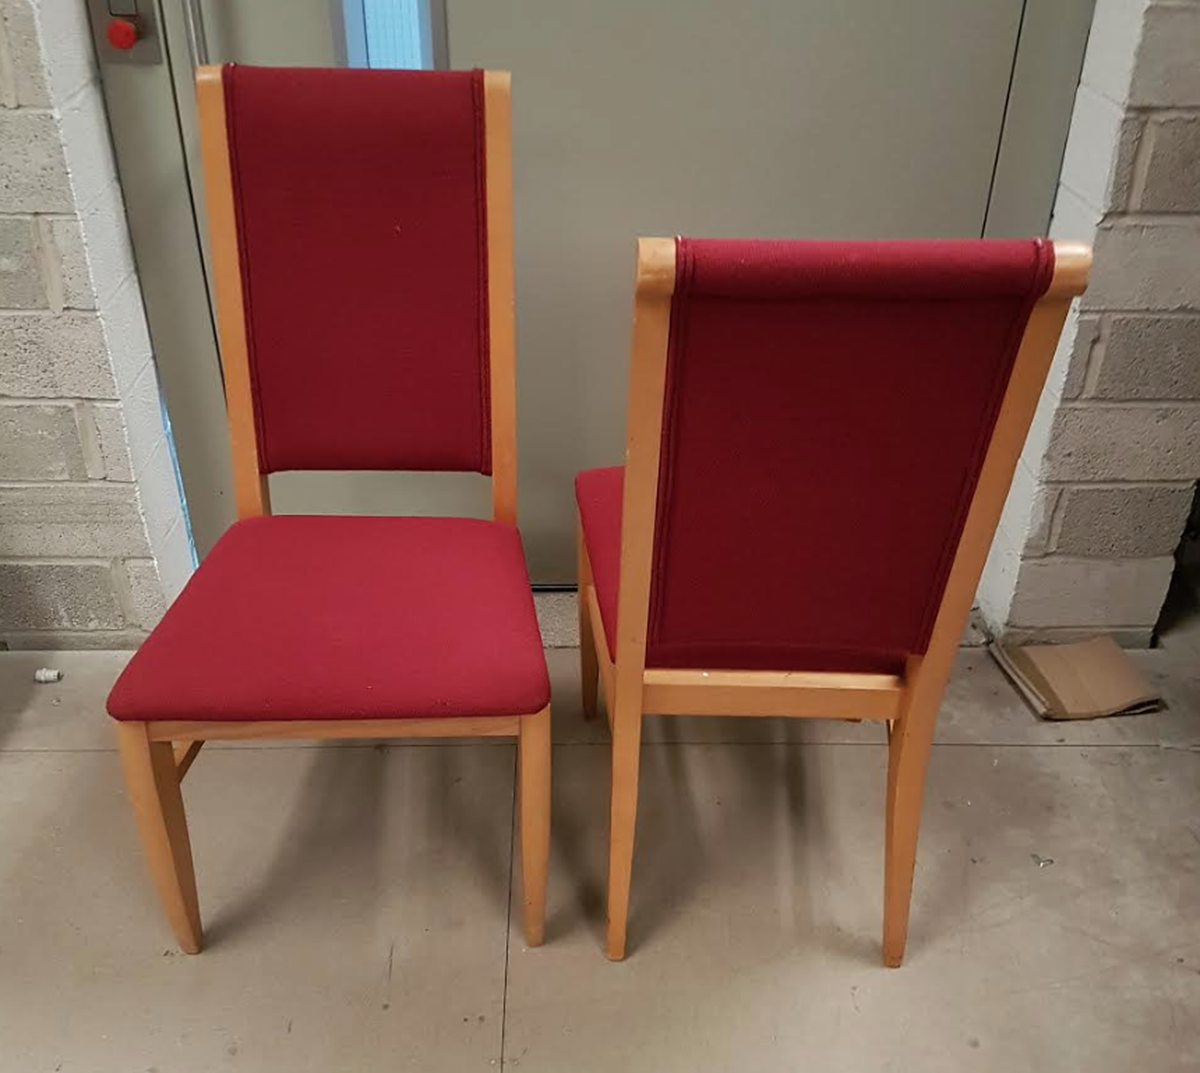 Second hand high back chairs